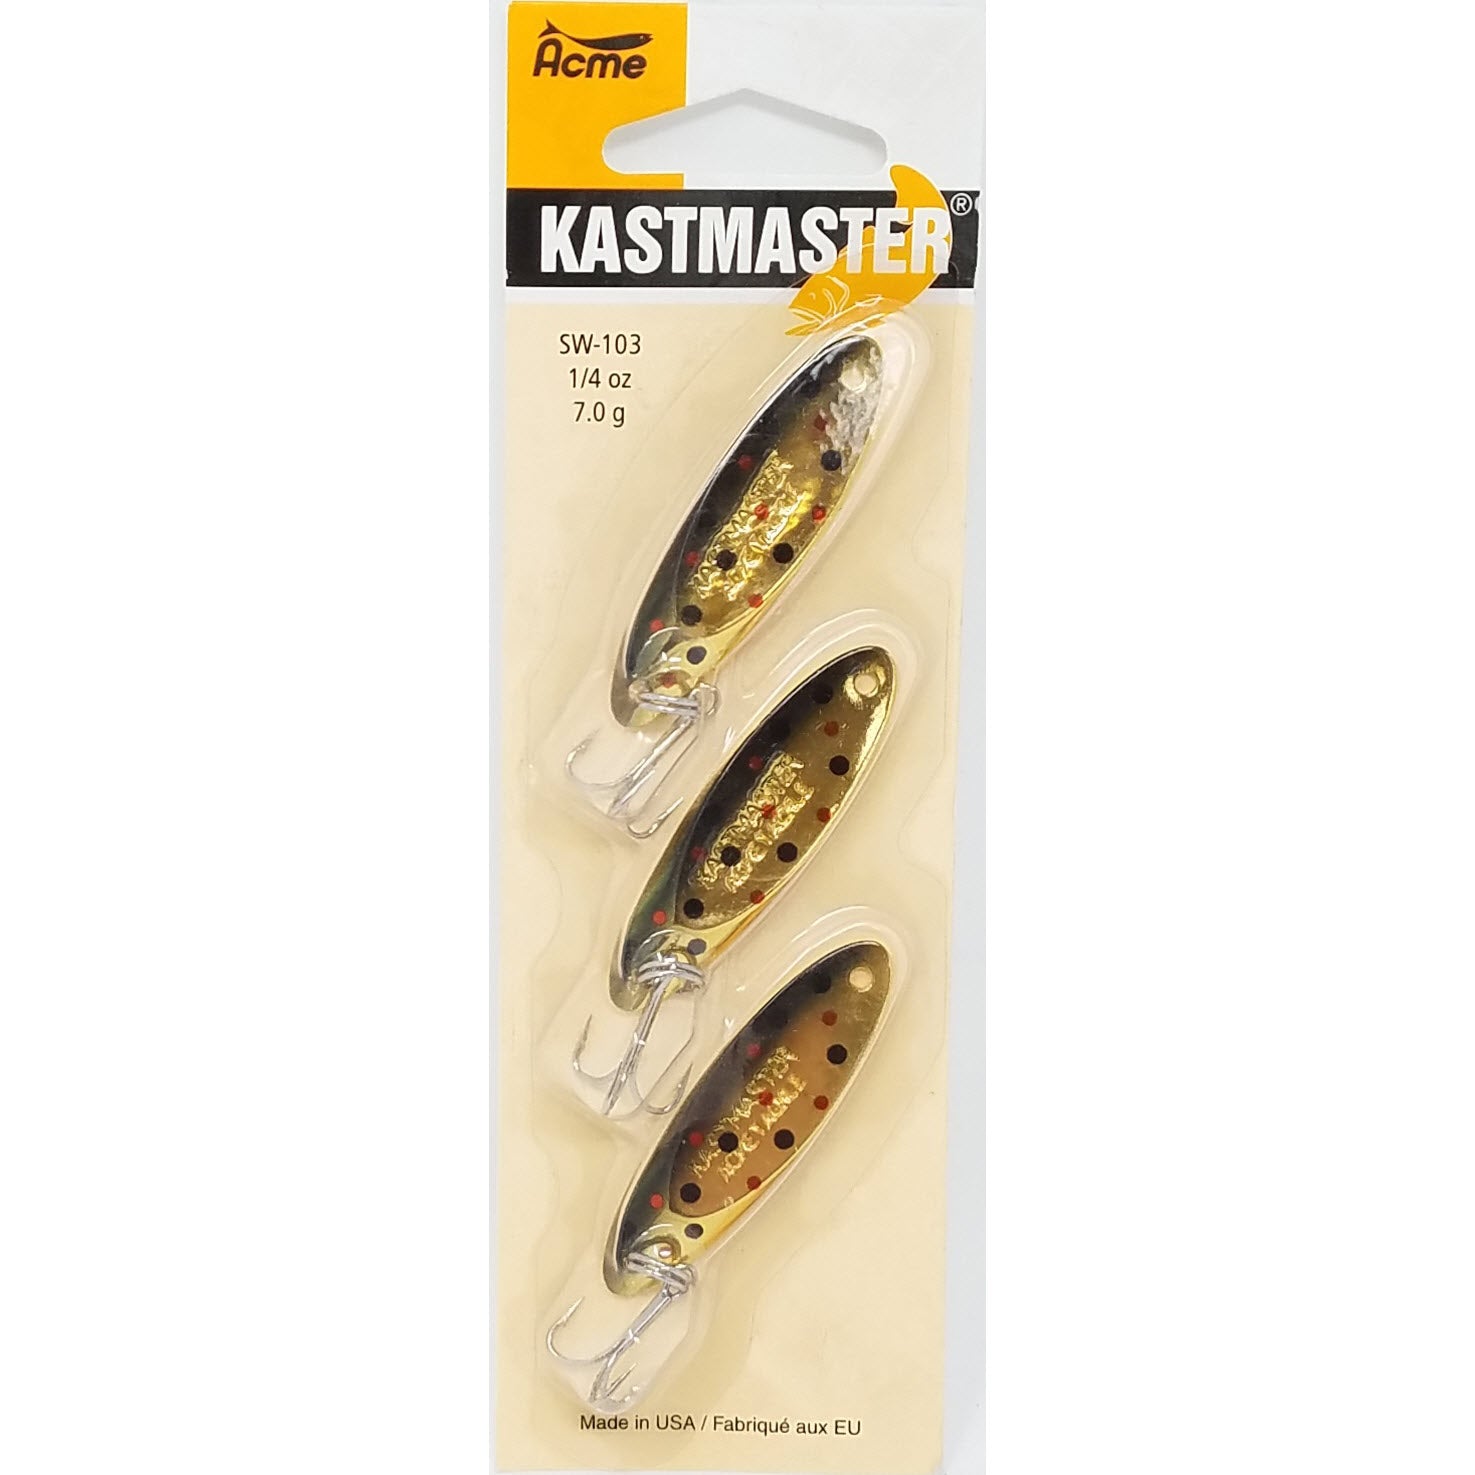 Acme Kastmaster Painted Patterns 12 Pack Fishing Lure Kit. 1/8 oz and 1/4 oz Kastmasters in Variety of Colors.